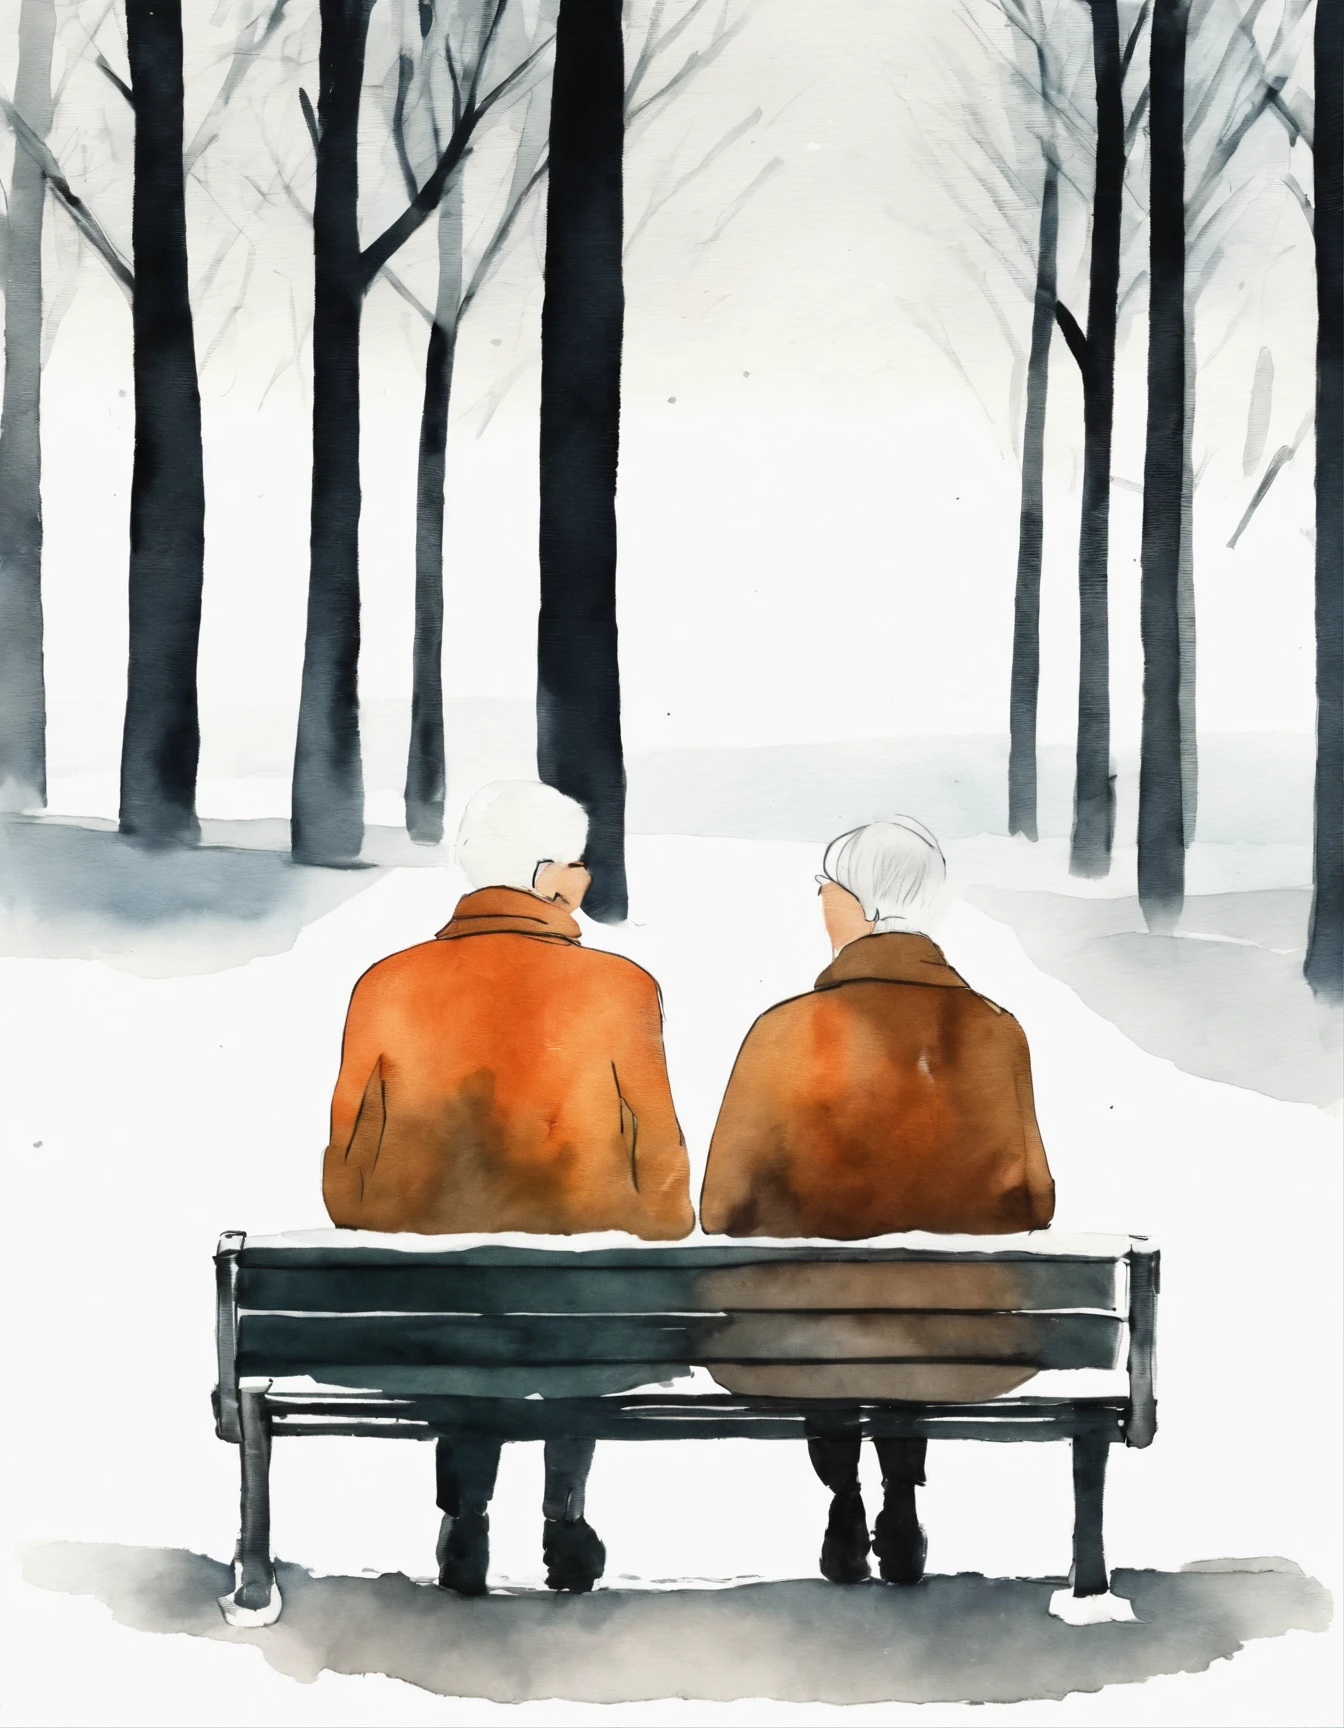 Use circles and lines to draw illustrations，An elderly couple sitting on a park bench in winter, Create using minimalist form